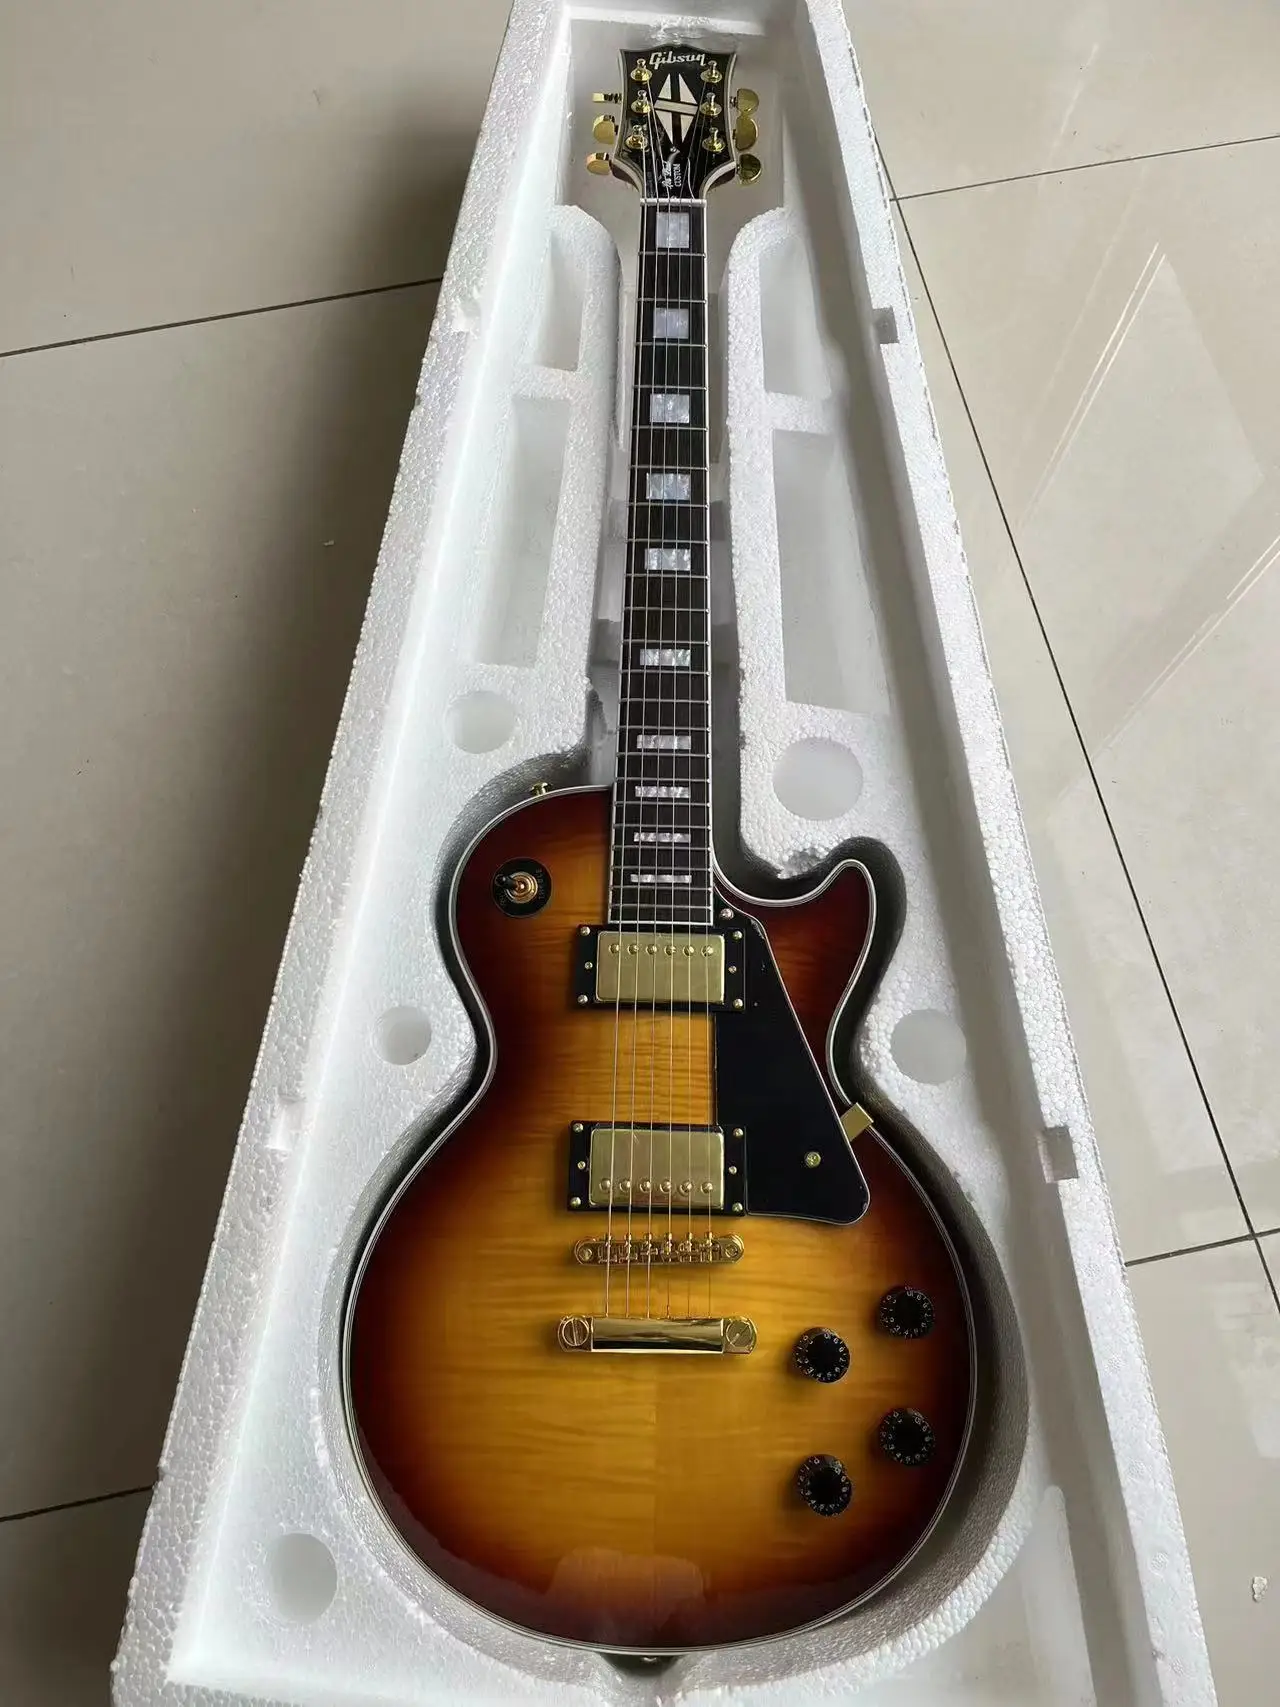 

Send in 3 days Flame Maple Top G Les Standard Brown LP Paul Electric Guitar in stock DFSGFSWDGGD